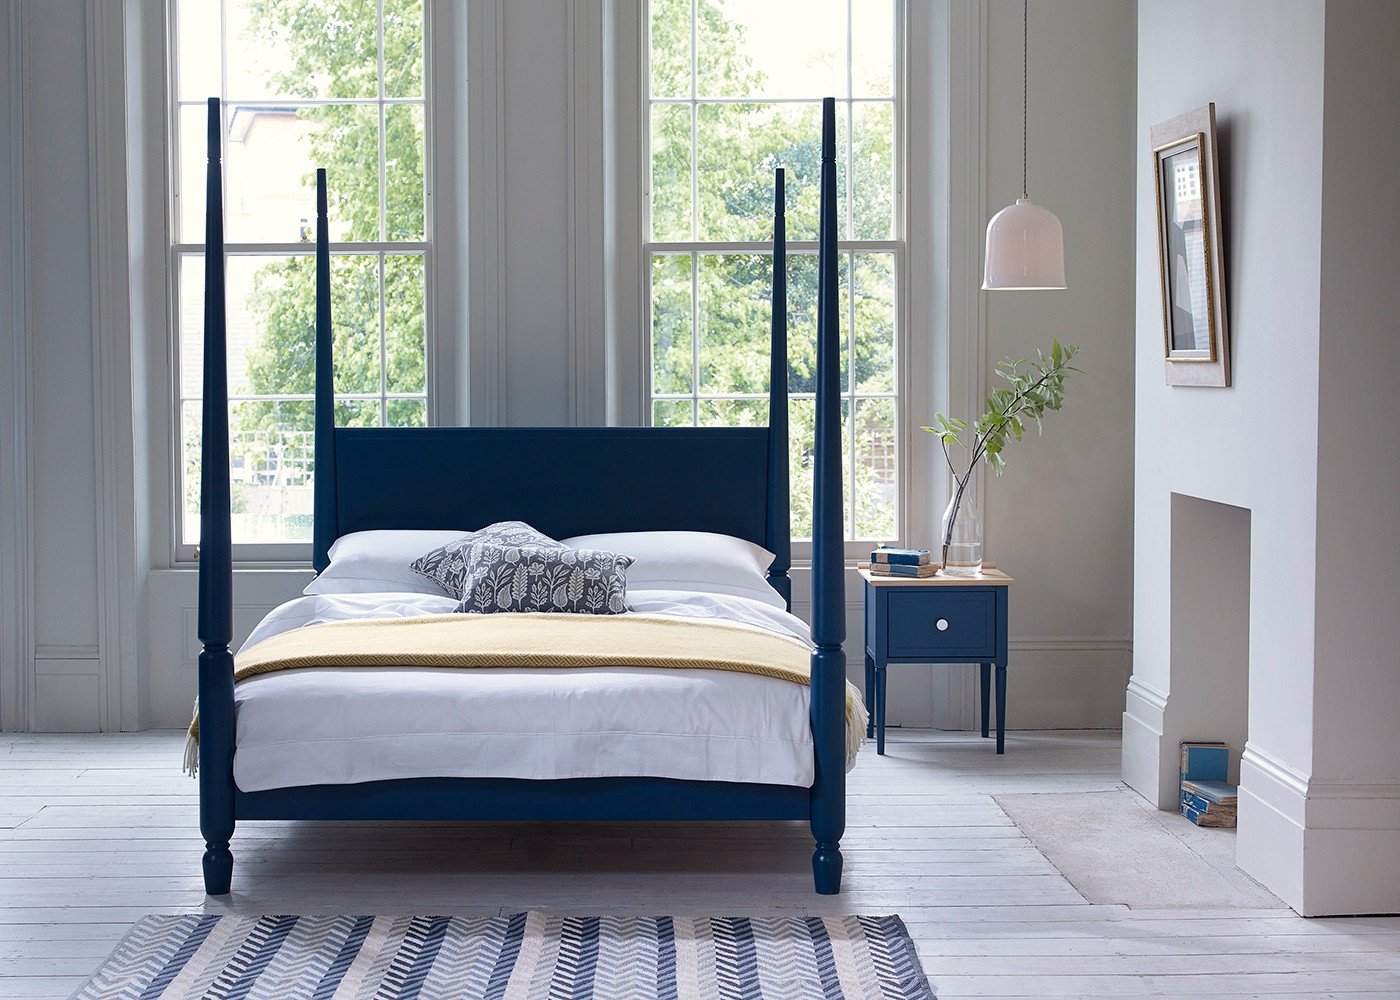 Heal's - Pinner 4 Poster Bed - Blue - Kirsty Whyte 